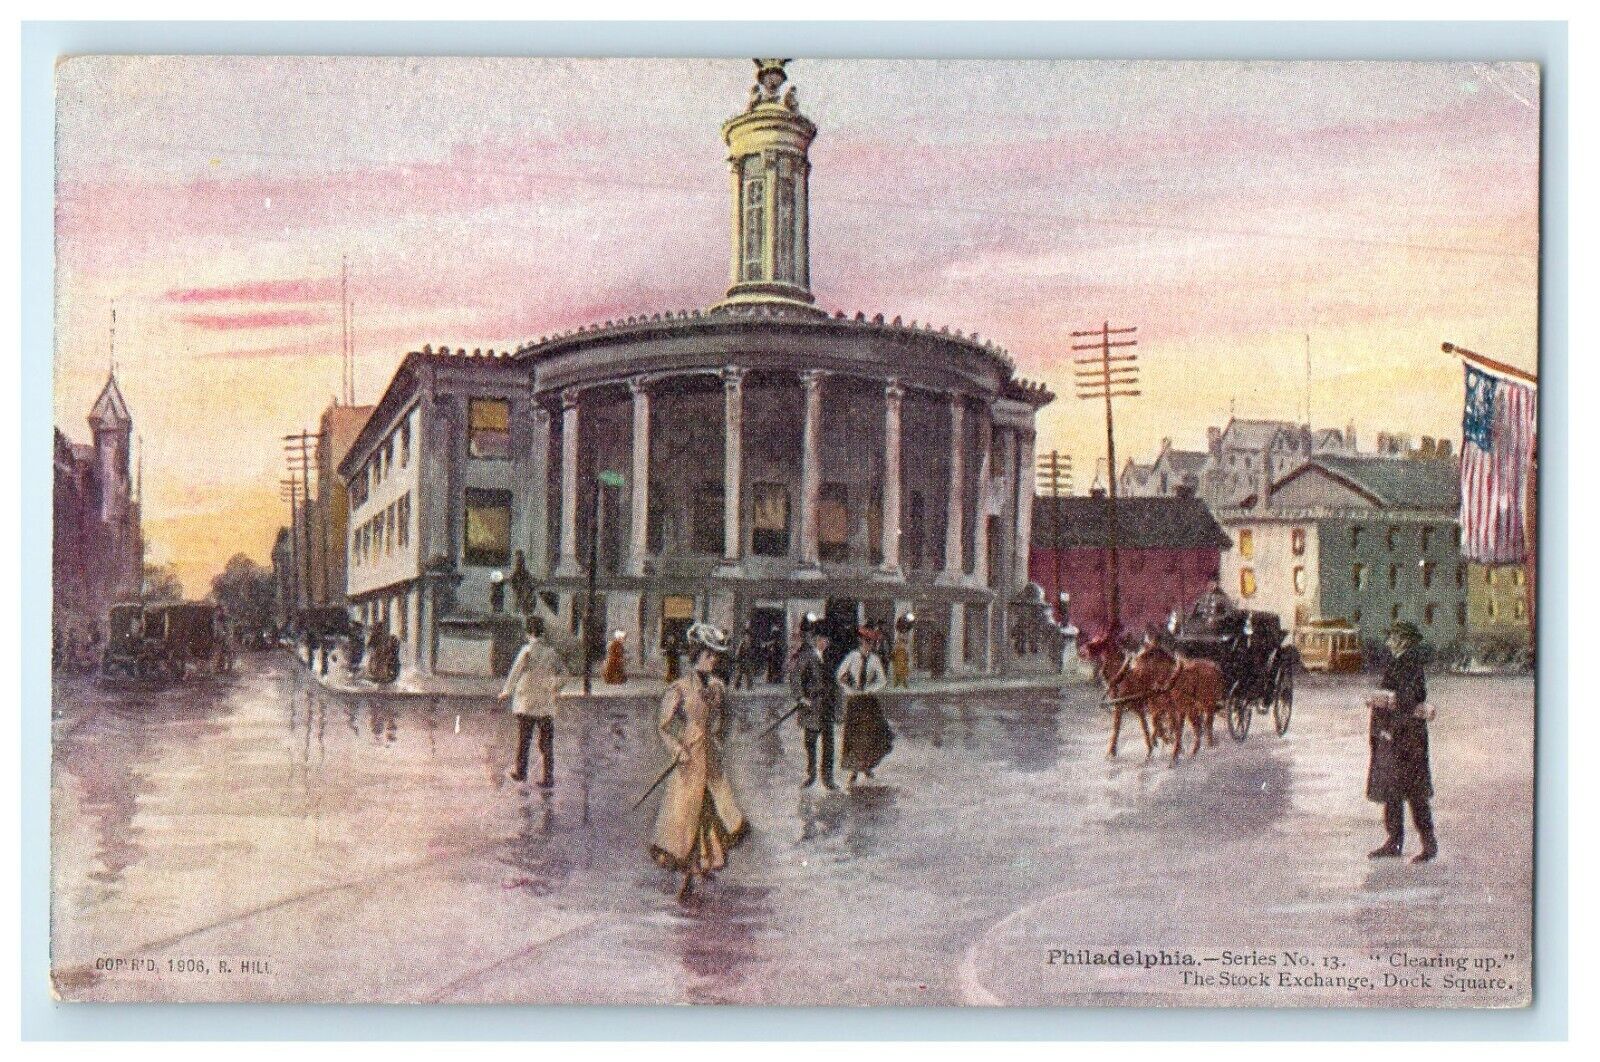 c1905 Philadelphia PA, Clearing up The Stock Exchange Dock Square Postcard